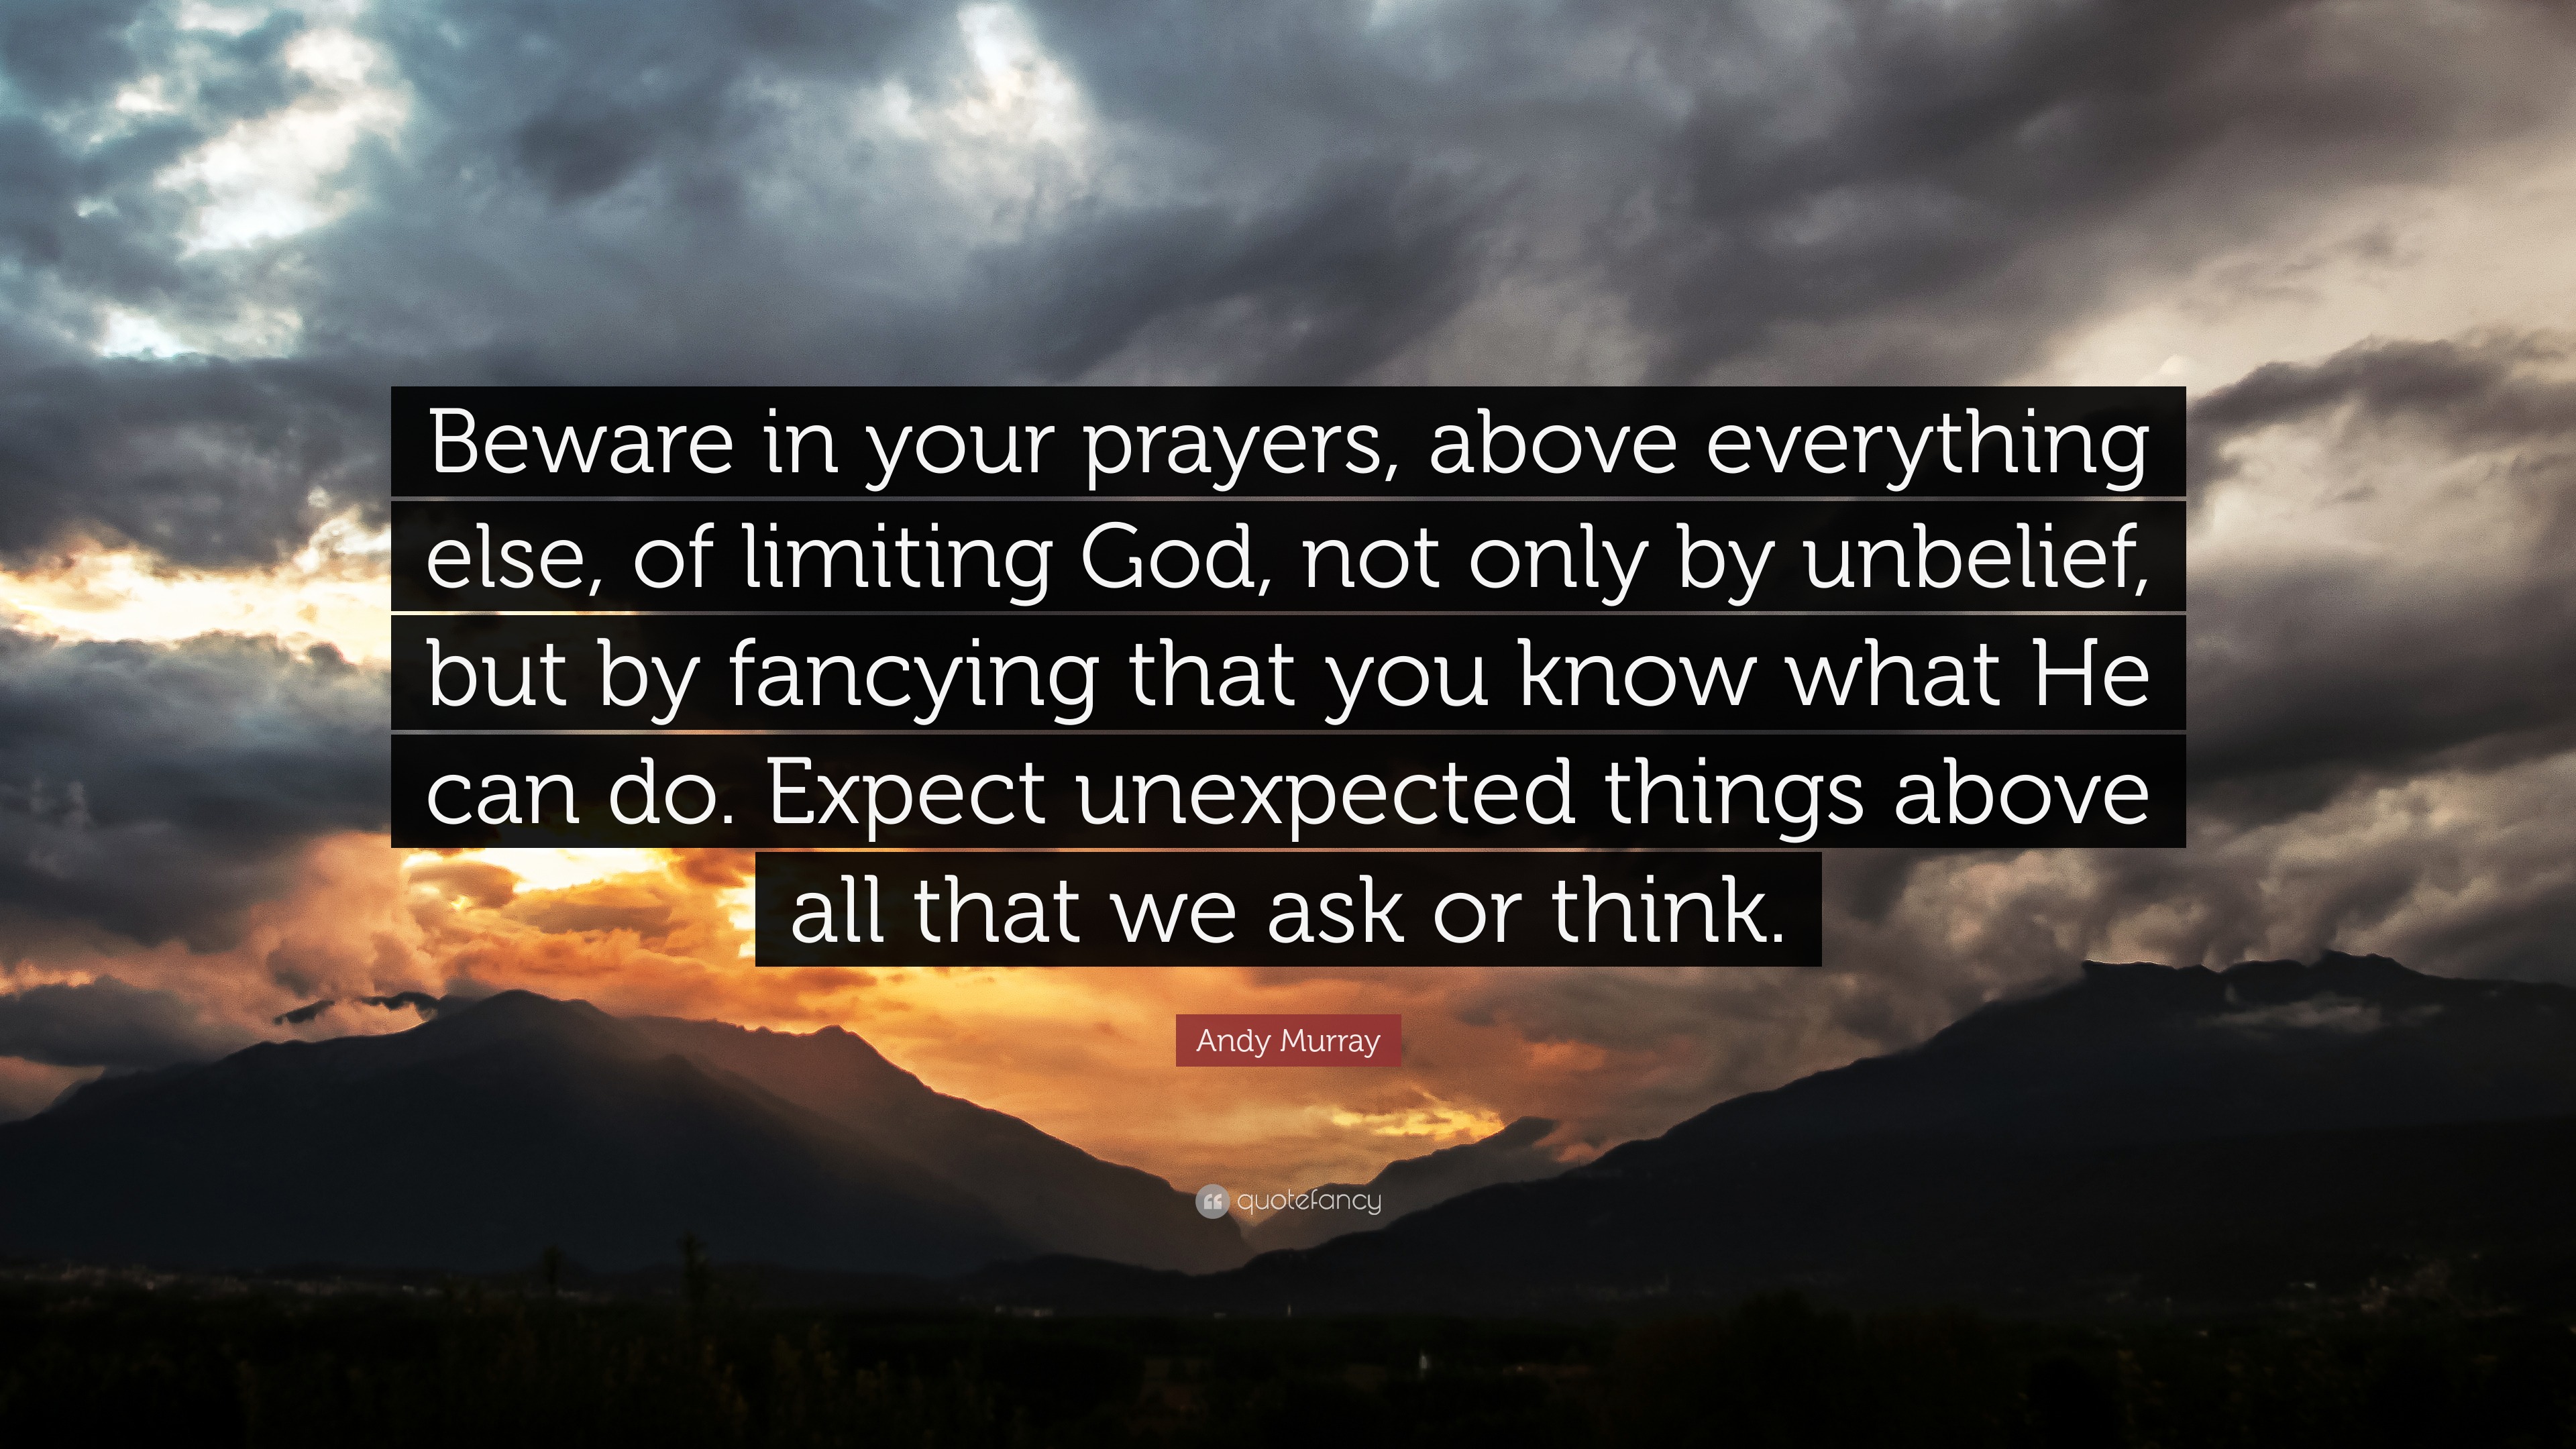 Andy Murray Quote: “Beware in your prayers, above everything else, of ...